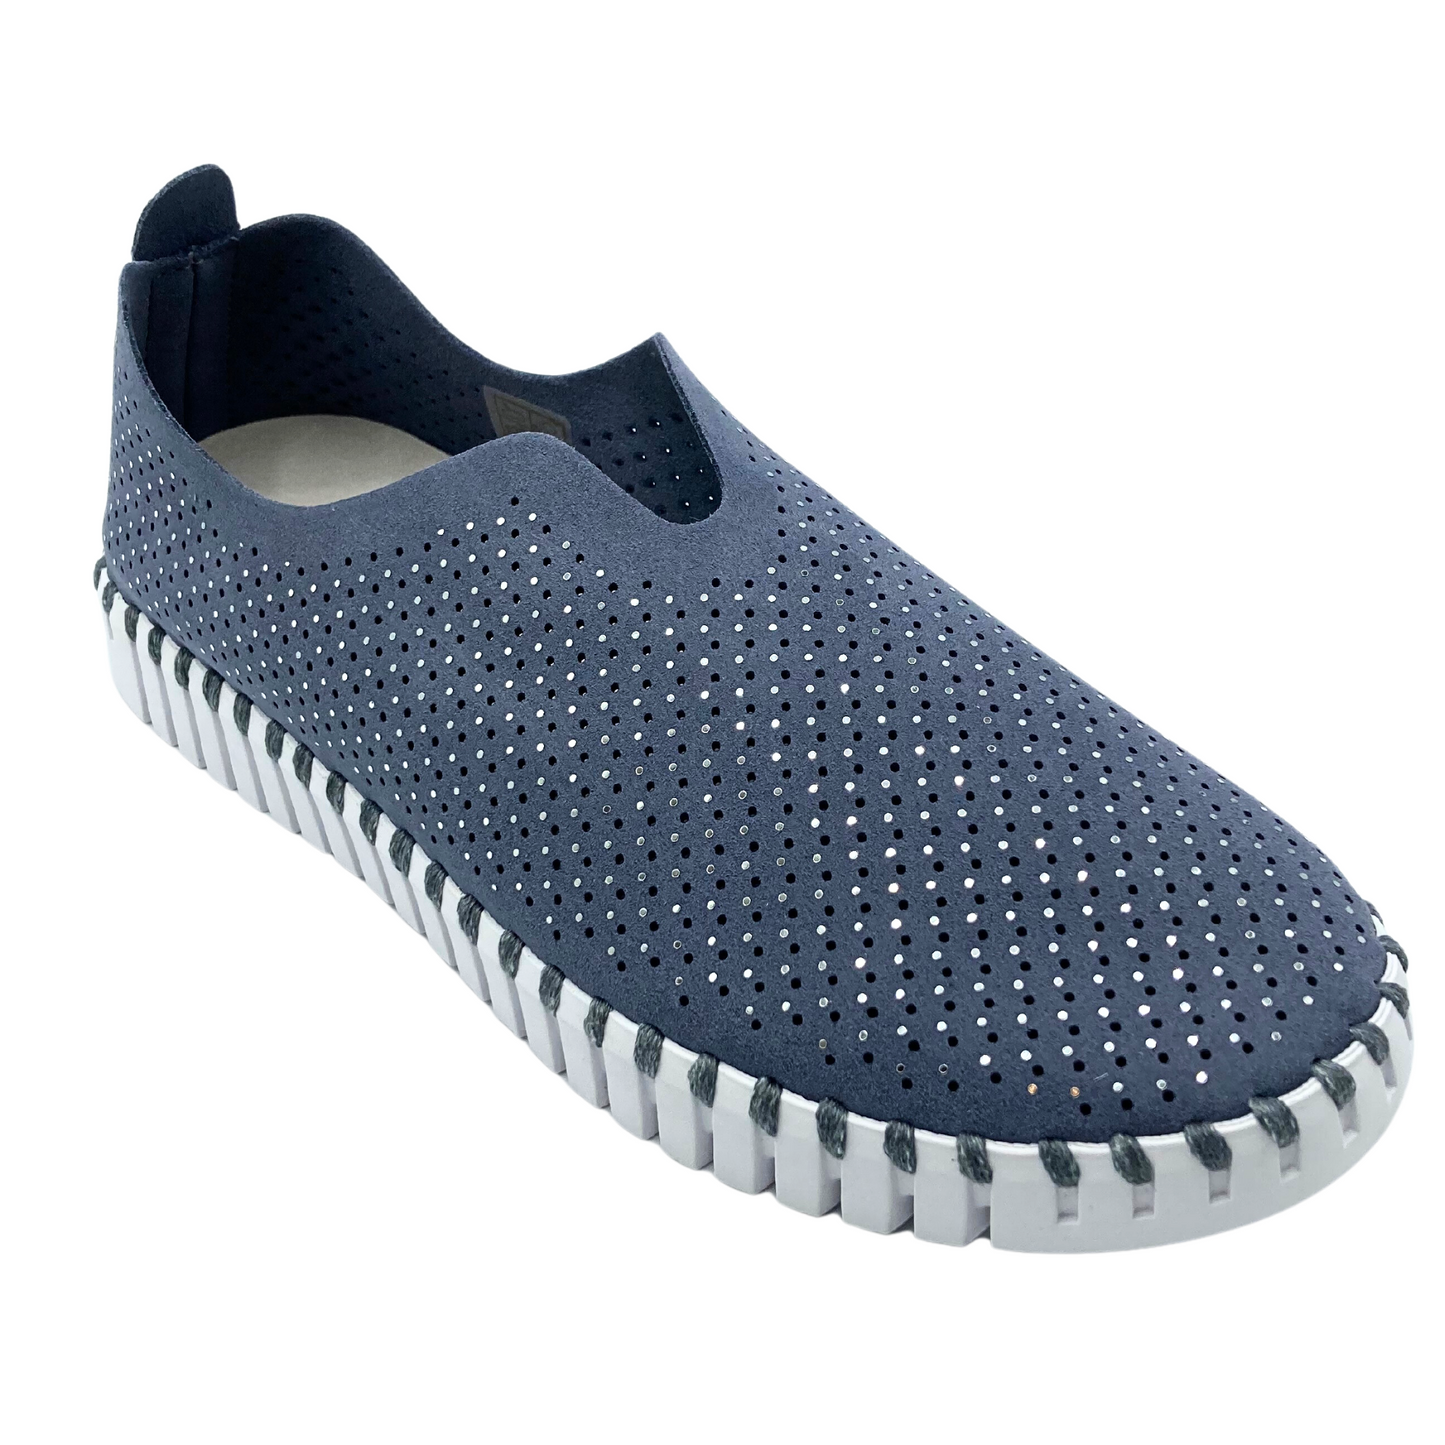 Angled side view of slip on sneaker in a blue/grey color with a white sole.  Recycled microfibre material with tiny laser holes and crystals.  White sole